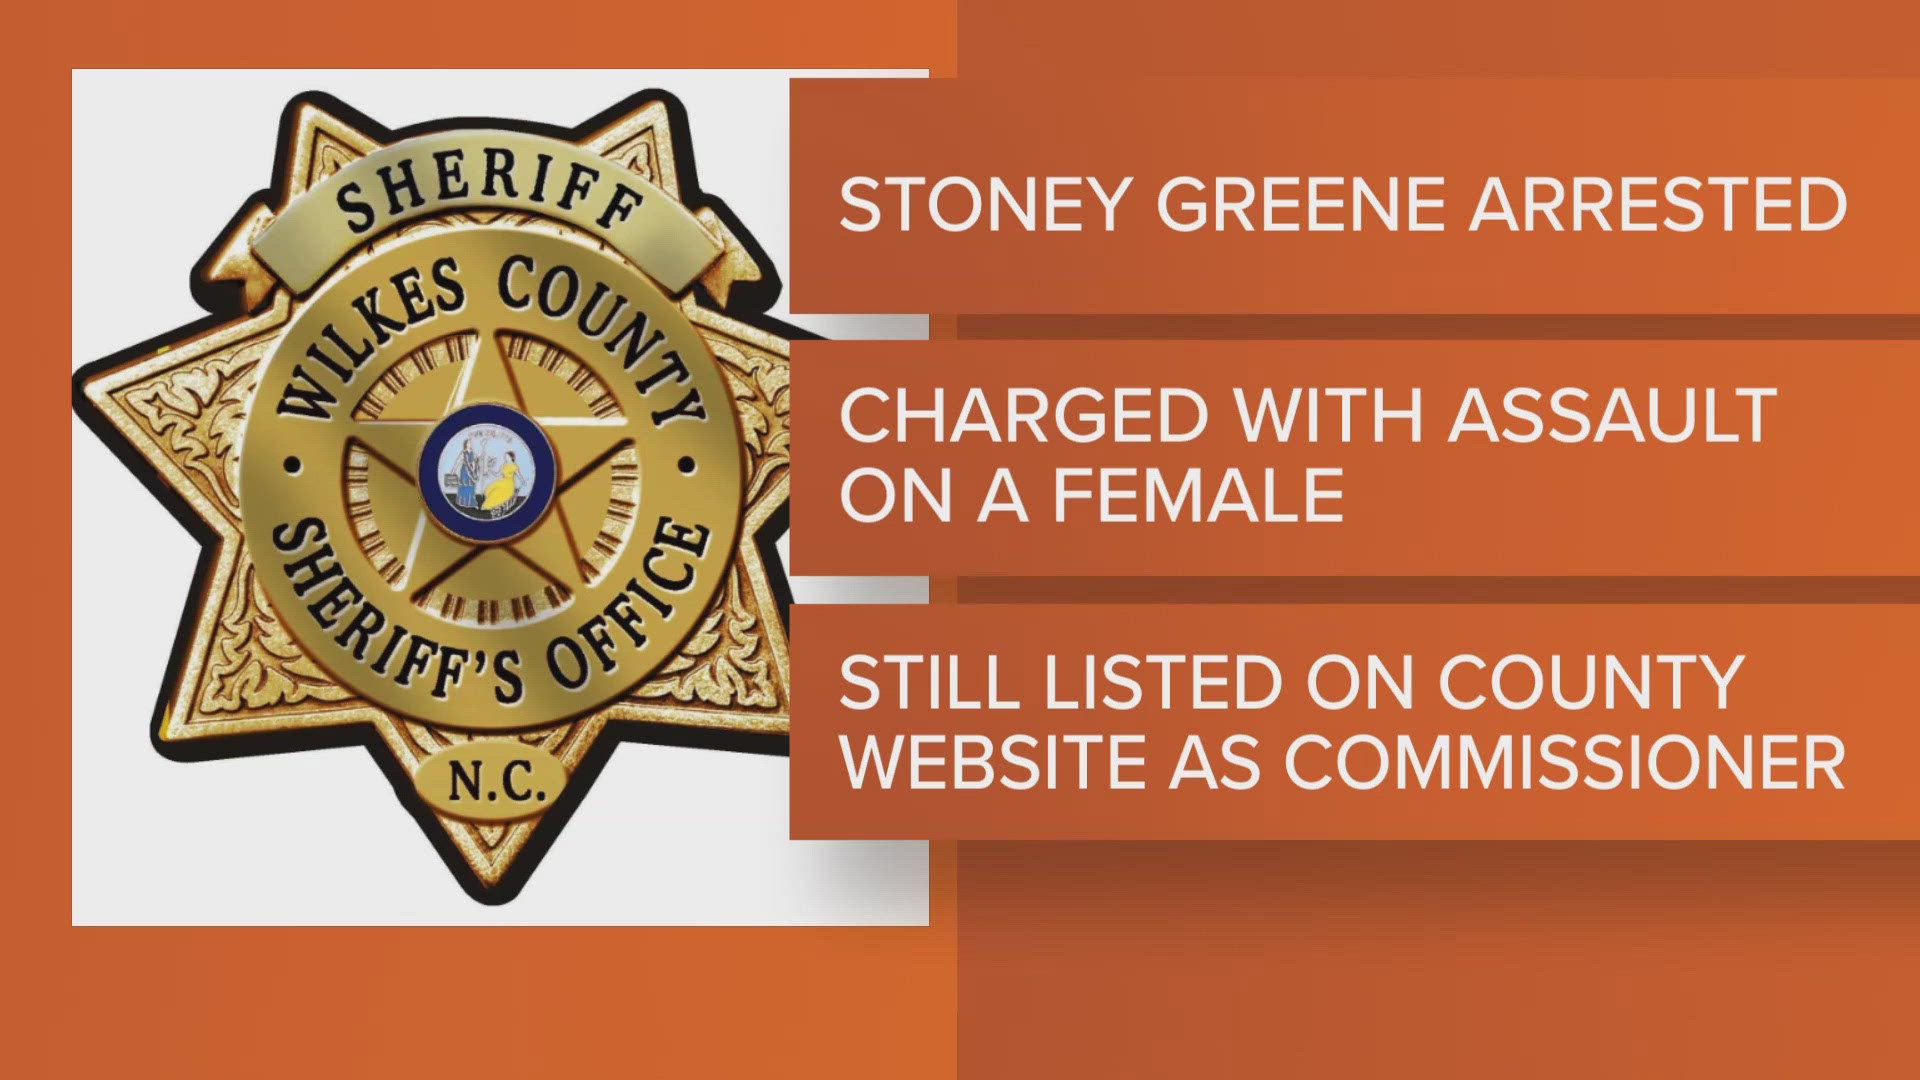 Stoney Greene is charged with assault on a female and trespassing.